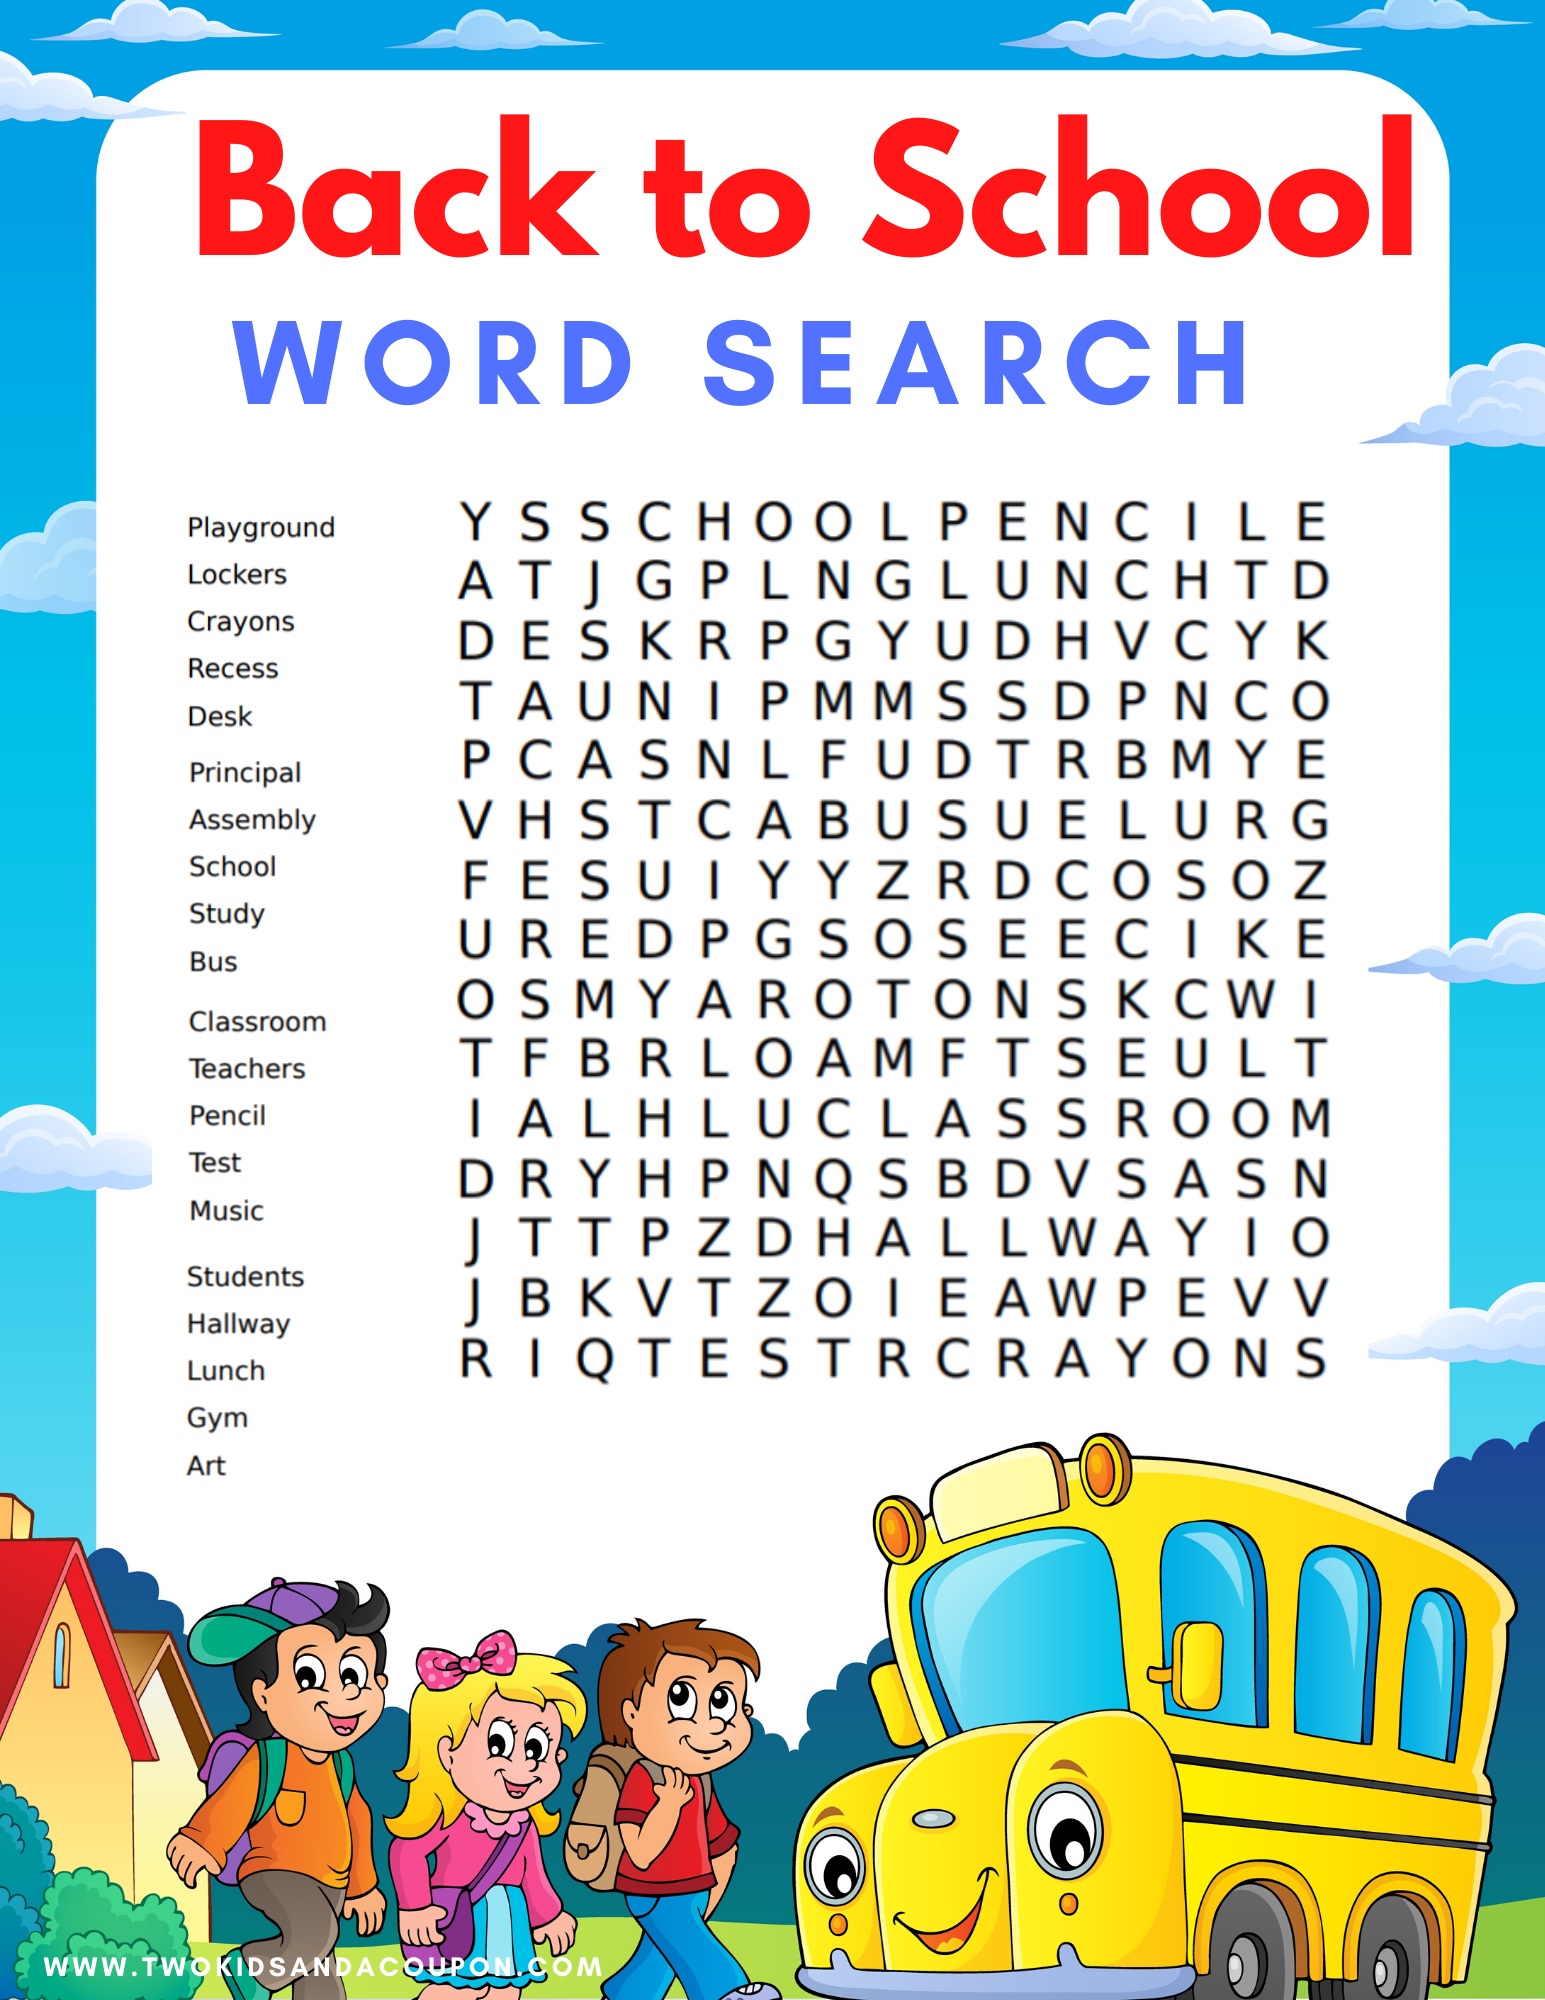 Back To School Word Search For Kids | FaveCrafts.com